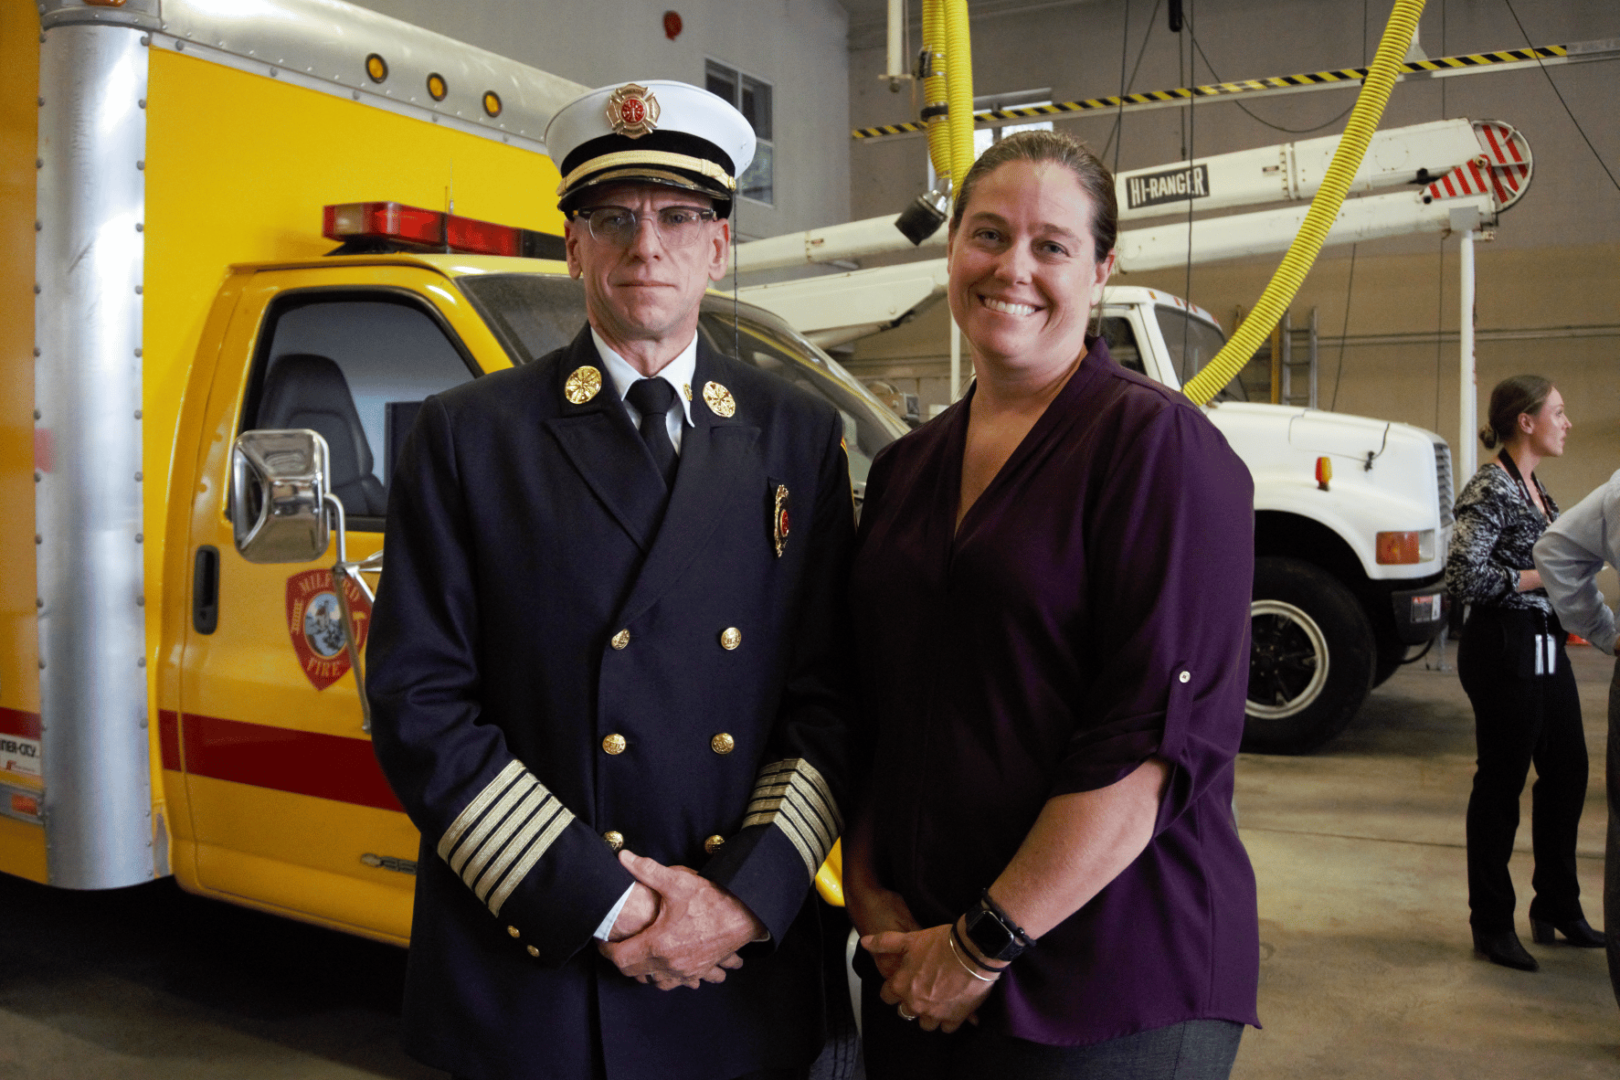 From left: Hopkinton Fire Chief William Miller with Hopkinton Public Safety Communications Director Meaghan Deraad. (Photo Courtesy Hopkinton Fire Department)